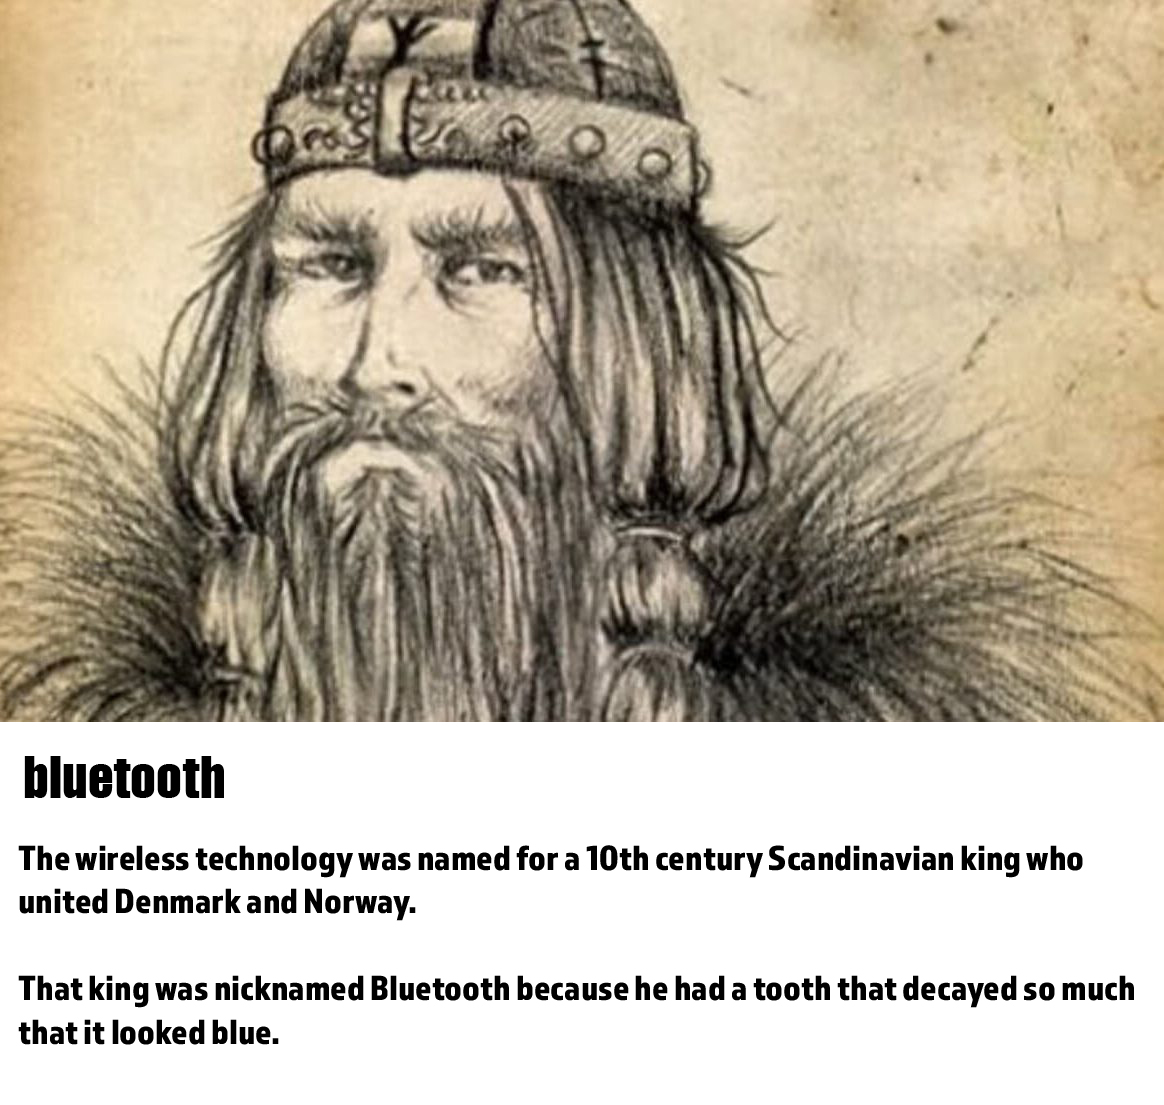 fun word origins history facts - bluetooth - The wireless technology was named for a 10th century Scandinavian king who united Denmark and Norway. That king was nicknamed Bluetooth because he had a tooth that decayed so much that it looked blue.